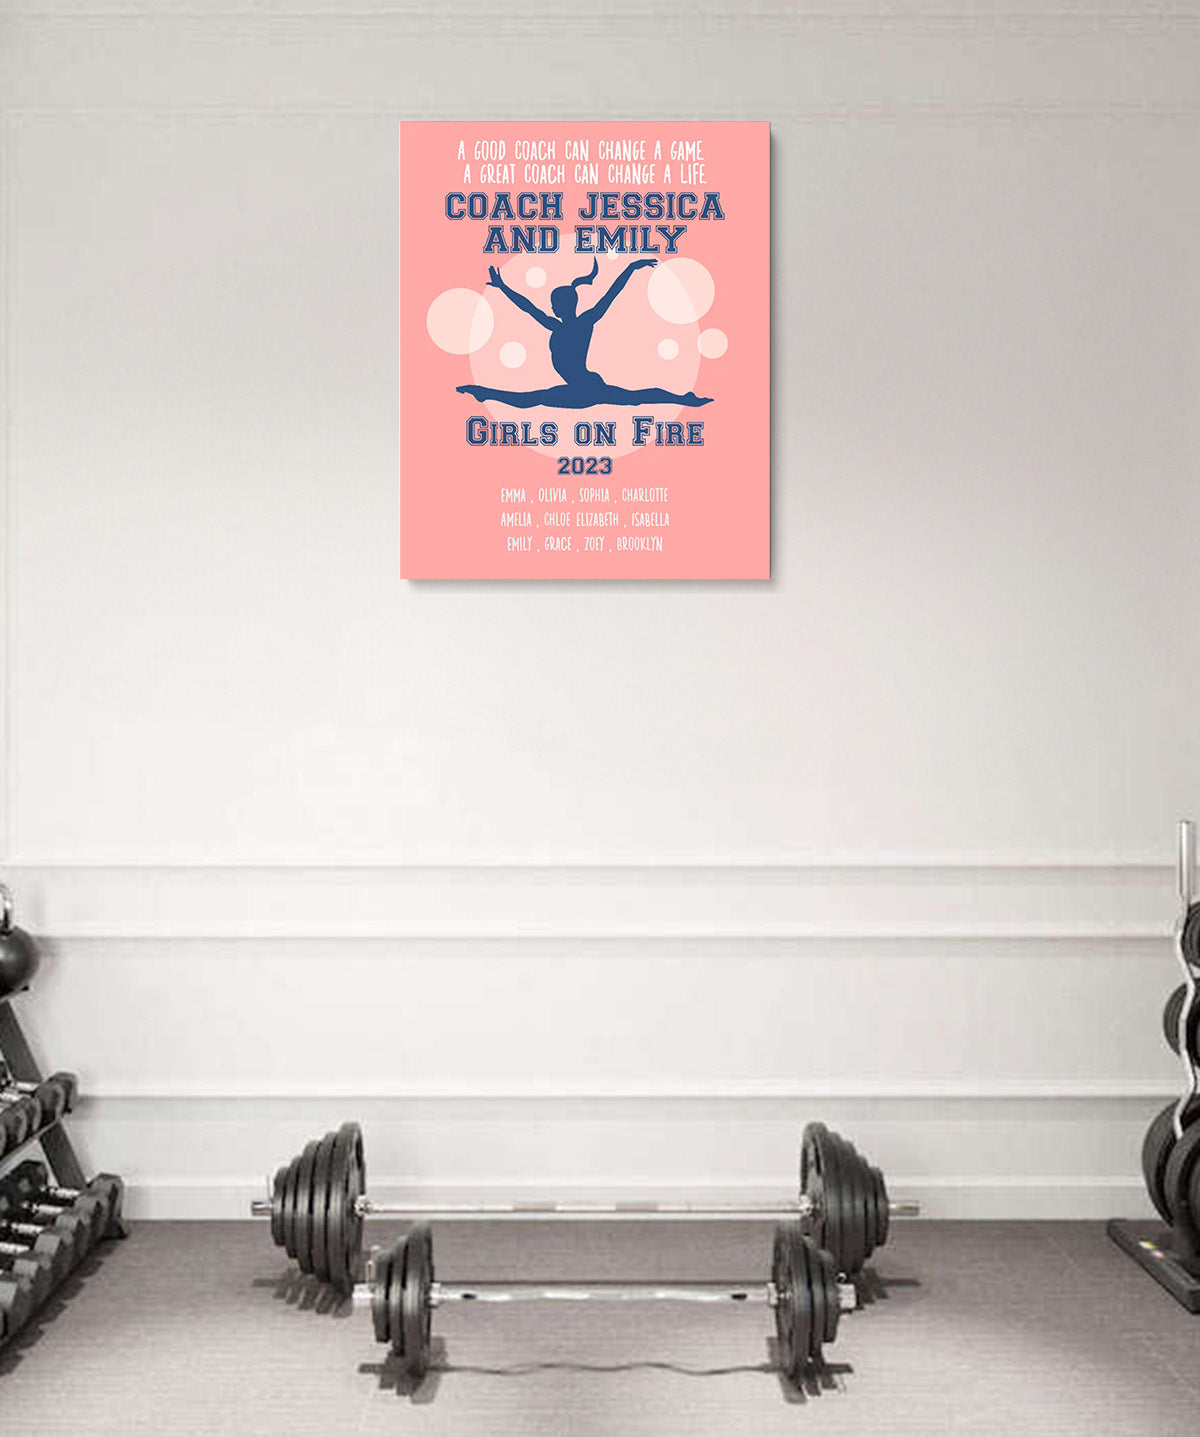 Gymnastics Coach Appreciation Gift - Customize With Athlete Names, Coach's Names, Team Name, Year or Season - Motivational Sports Wall Art - Coach's Quote